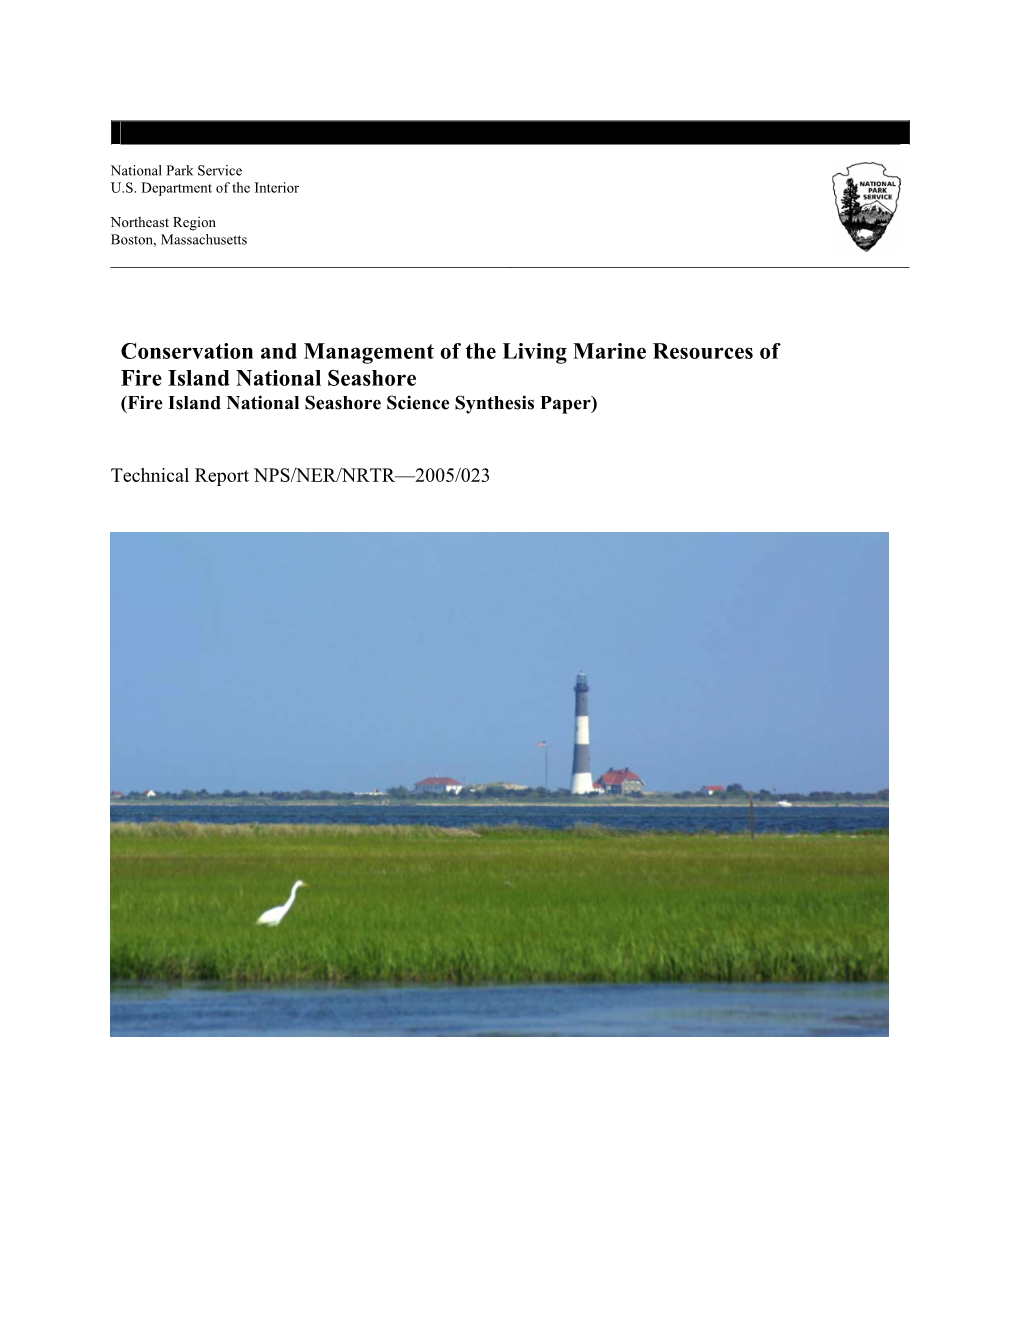 Conservation and Management of the Living Marine Resources of Fire Island National Seashore (Fire Island National Seashore Science Synthesis Paper)